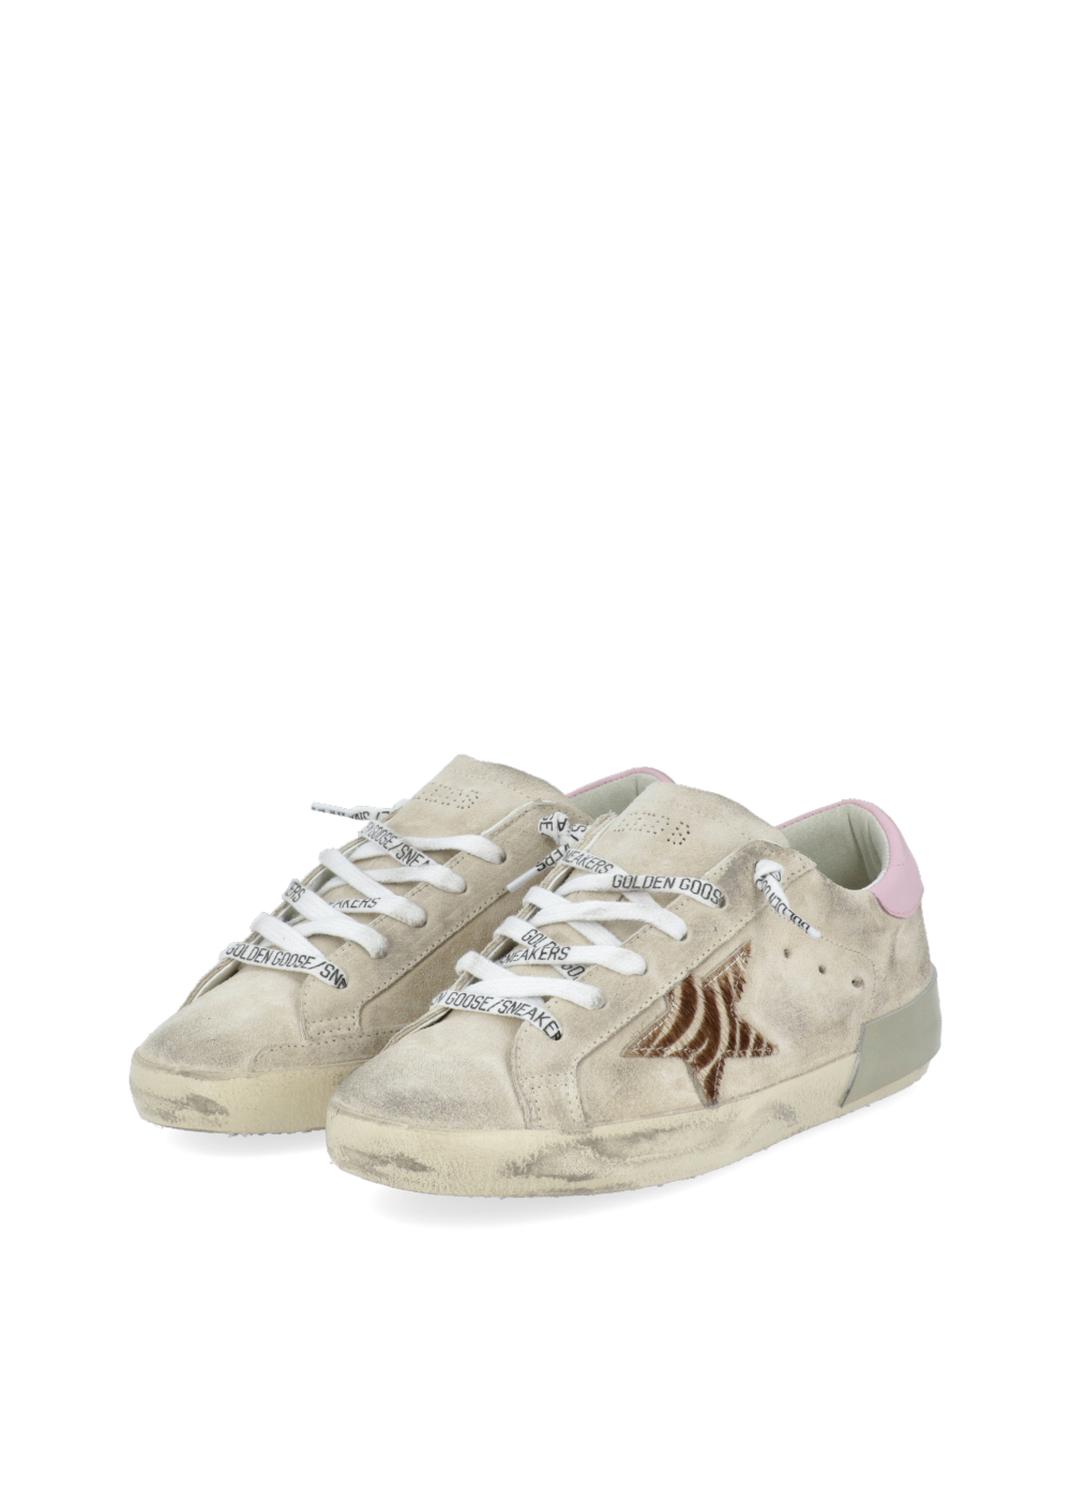 Golden Goose tenis Super-Star para mujer GLG-ZDSUPERS - LOUDER Lifestyle